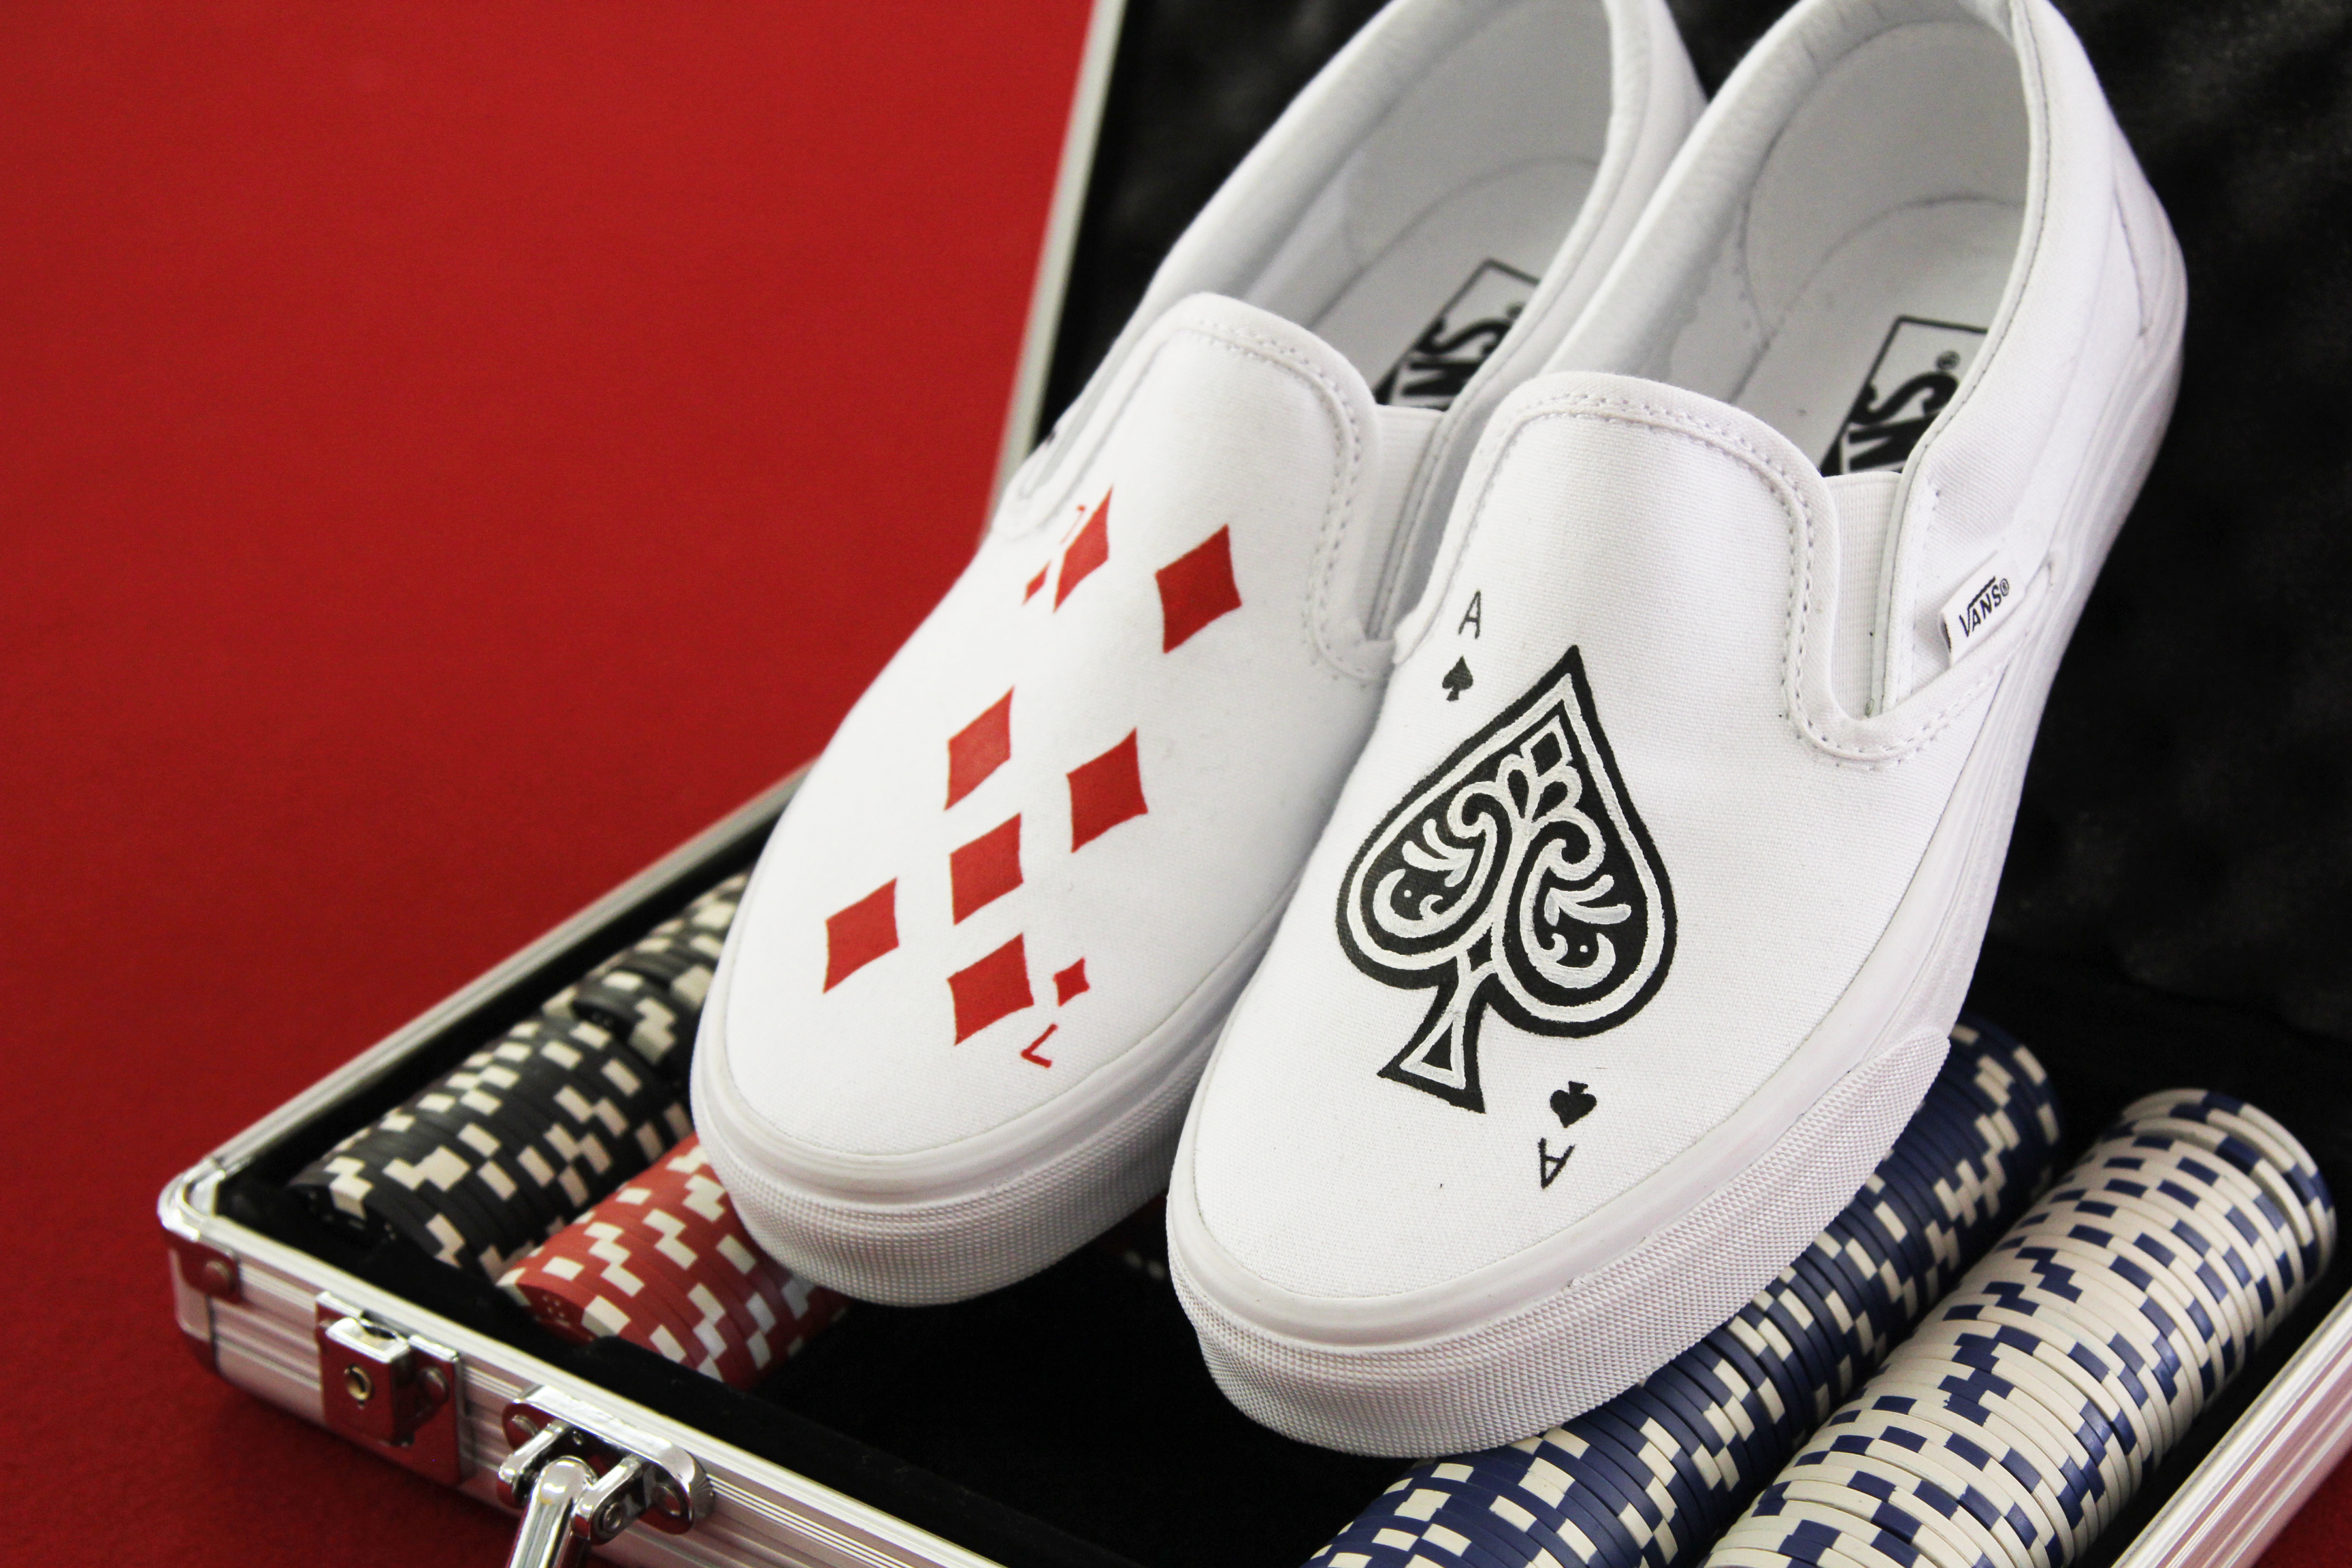 vans playing card shoes